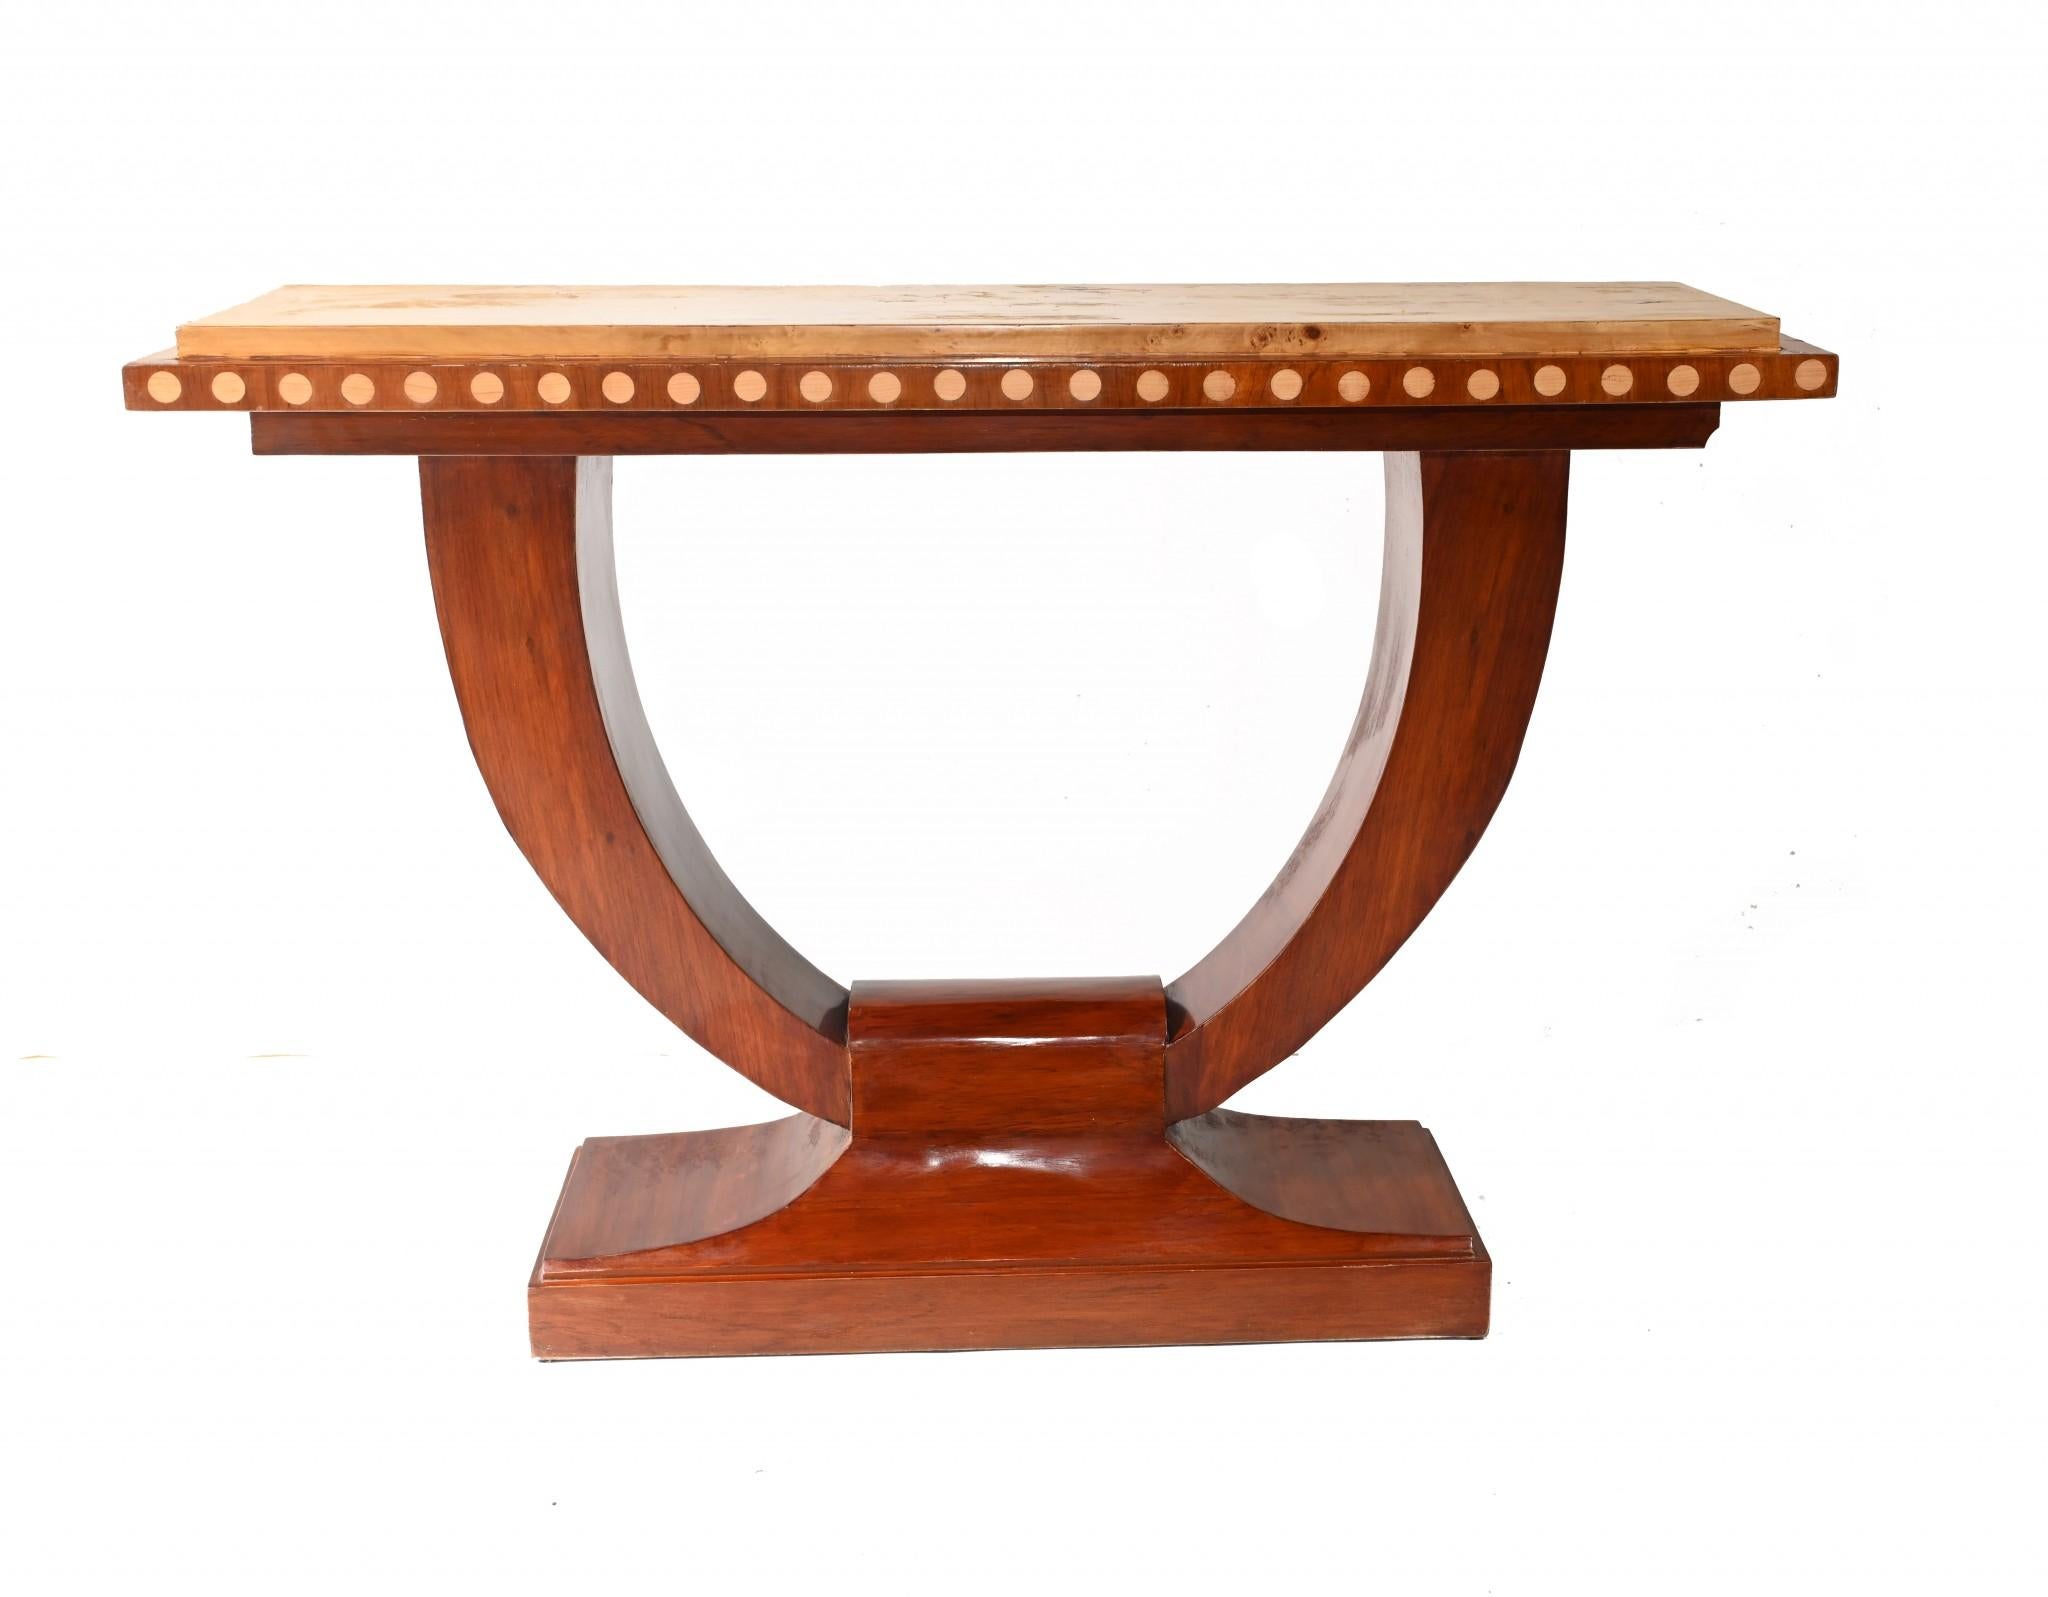 Vintage Art Deco Console Table Roaring Twenties Interiors In Good Condition For Sale In Potters Bar, GB